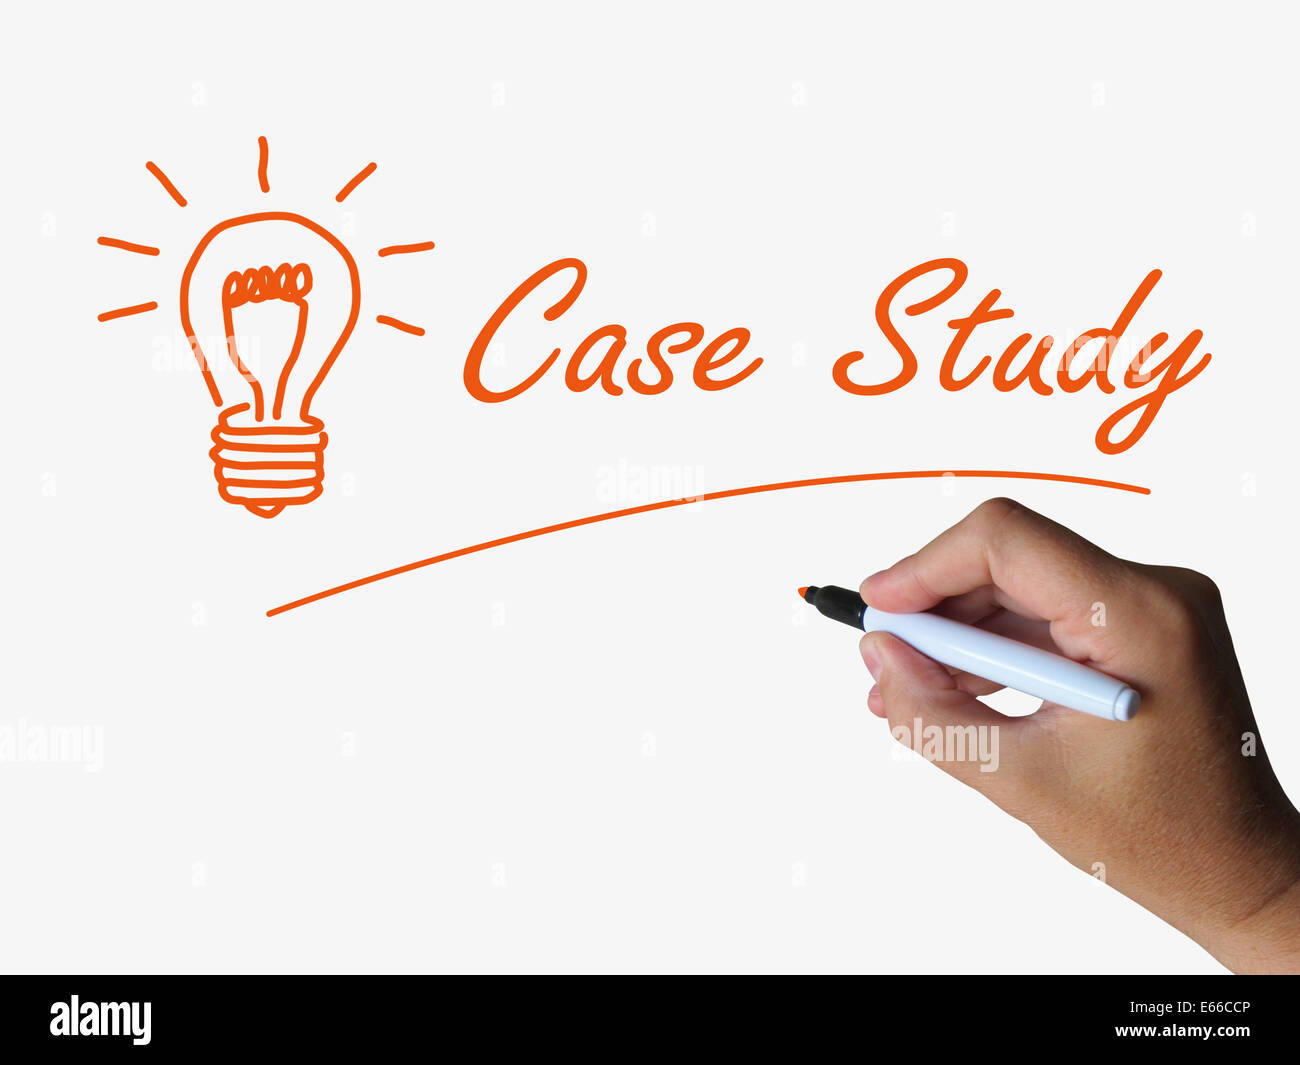 Case Study and Lightbulb Indicating Concepts Ideas and Research Stock Photo